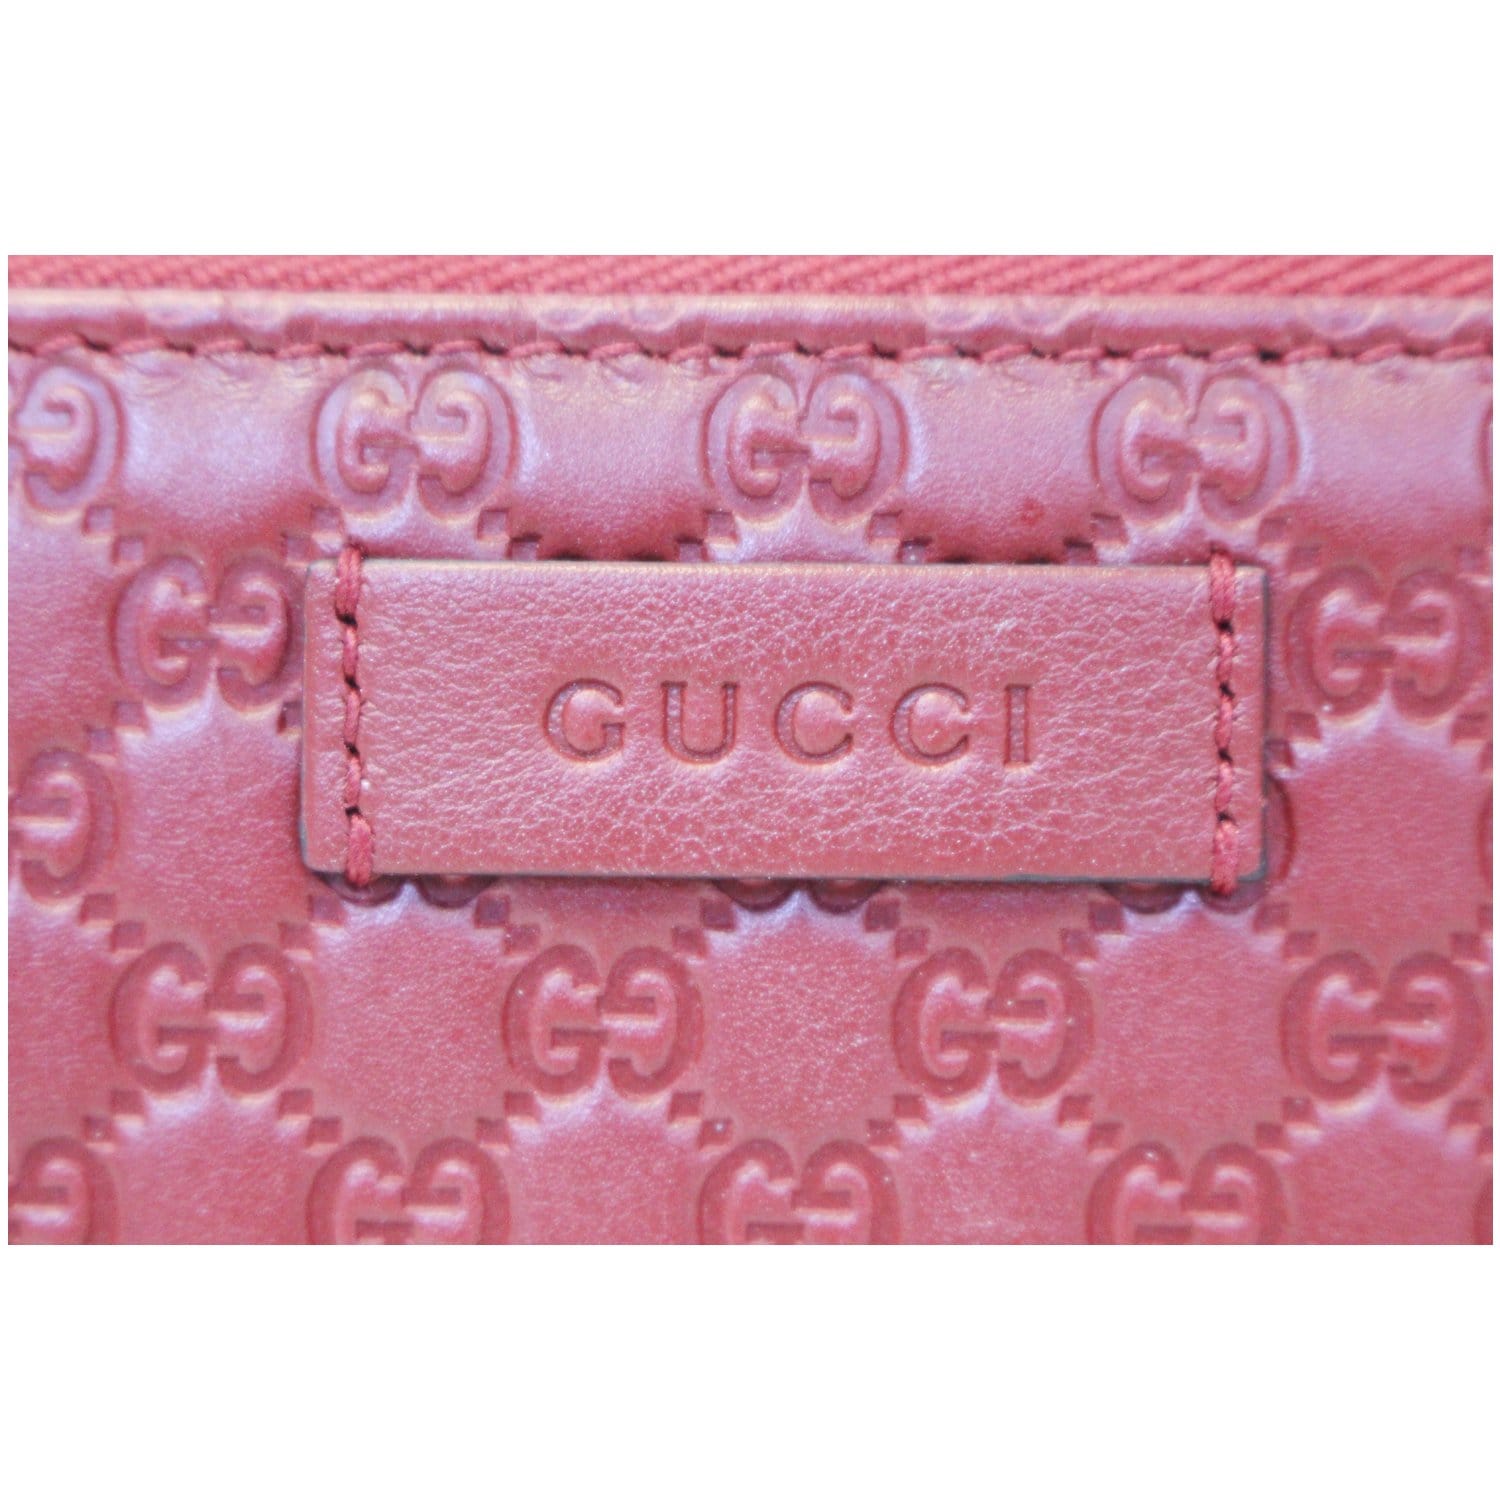 Gucci Leather Micro Gg Guccissima Zip Around Wallet Red Us Products Contactsheet 3 Copy d9a 4c4a 4f8d Ab57 1e135e3a4bfe Jpg Products Contactsheet 2 Copy Fb810ee2 51 4080 fa 7afdd Jpg Products Contactsheet